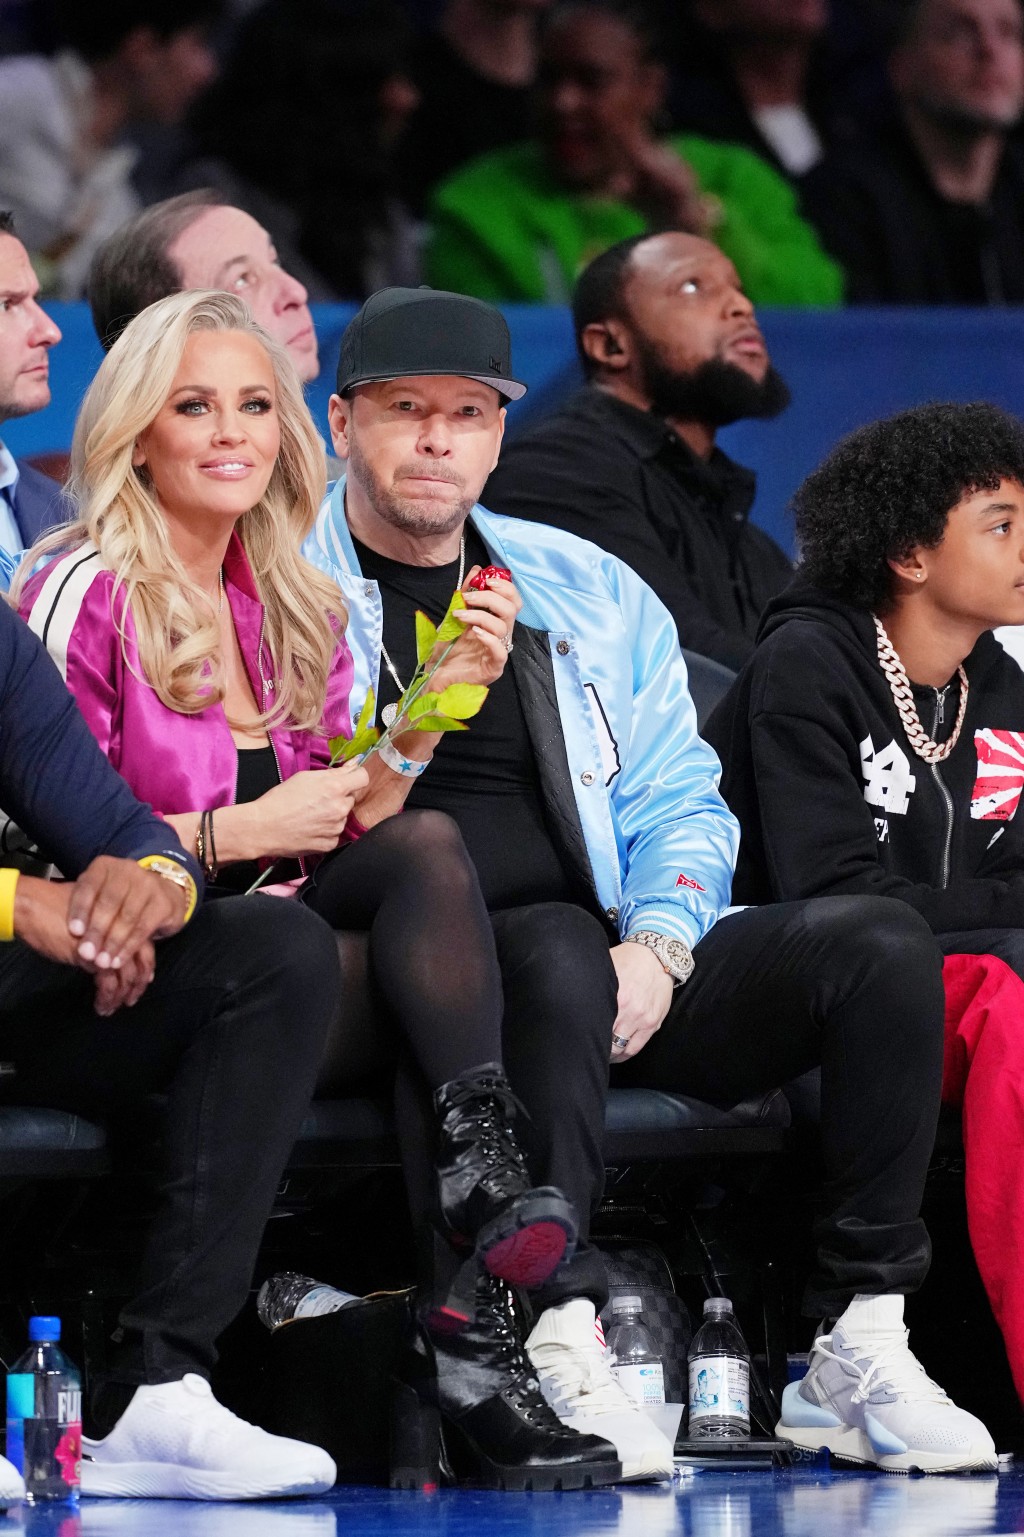 Jenny McCarthy and Donnie Wahlberg結伴看NBA明星賽。REUTERS